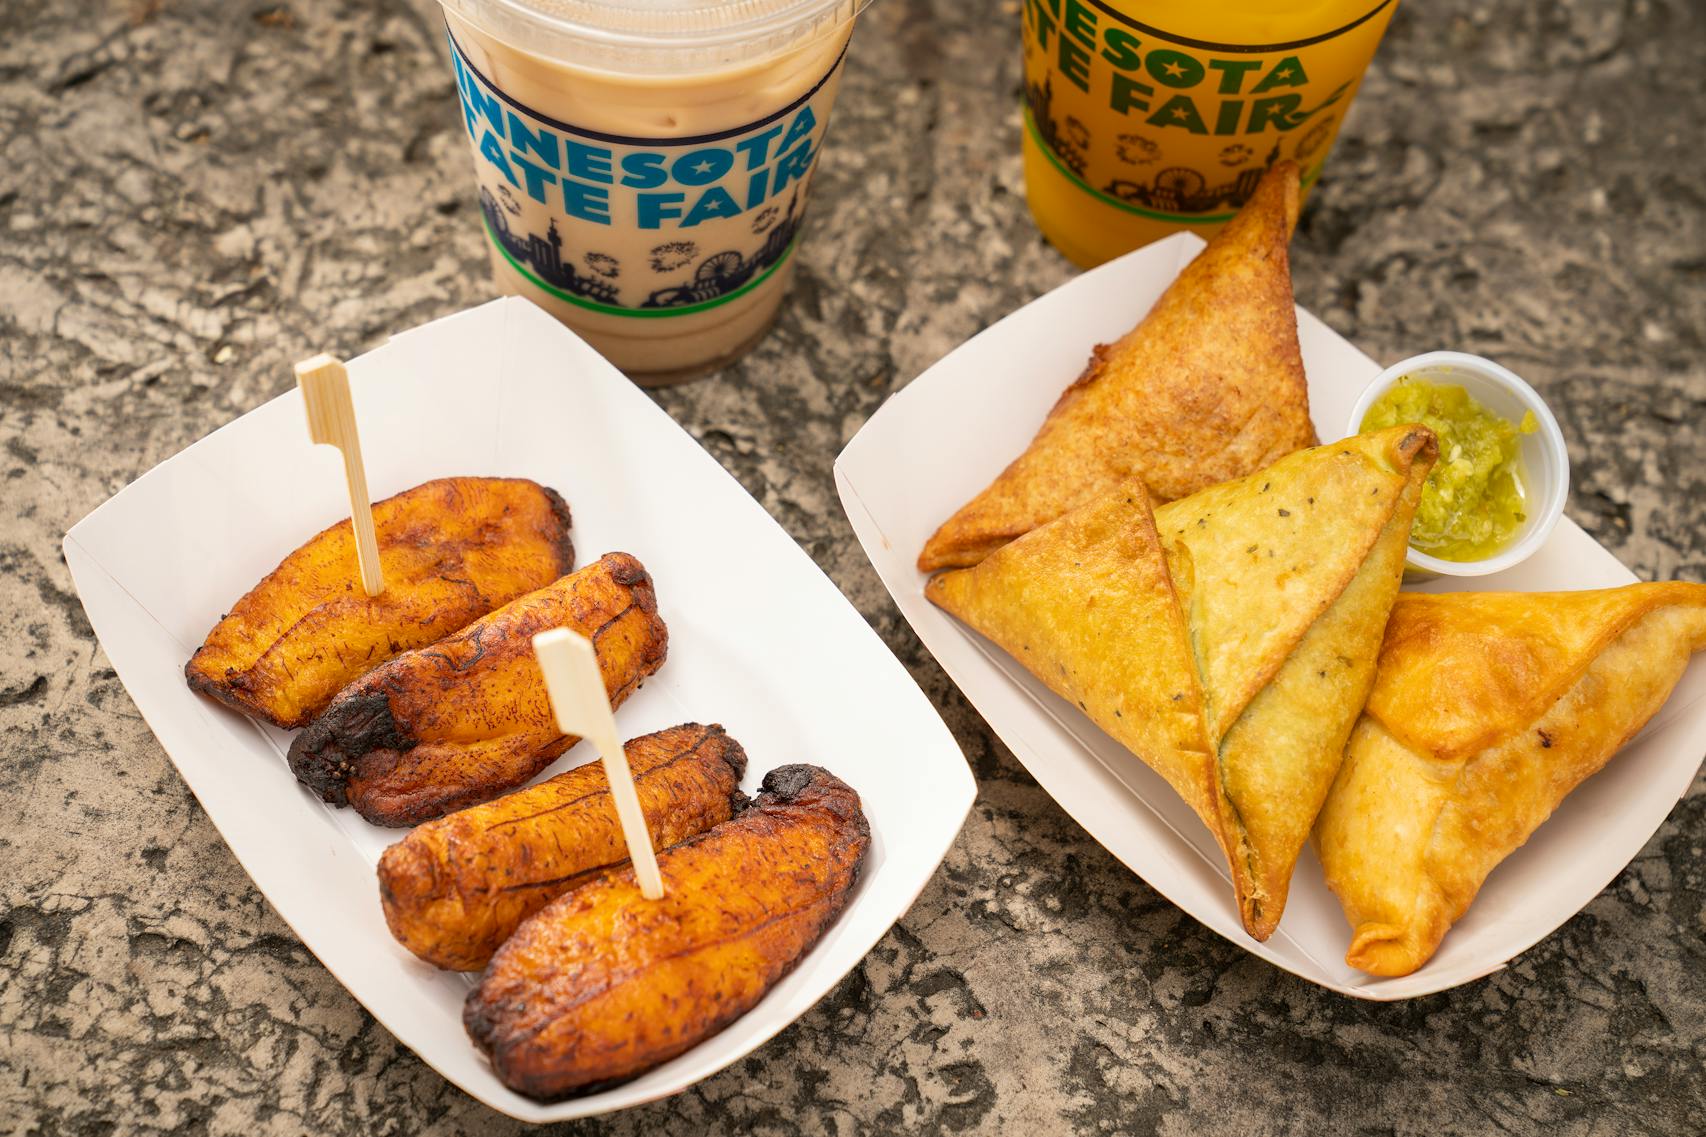 Foods from new vendor Afro Deli: Sambusas, Sweet Plantains, Somali Tea and Fresh Mango Juice. The new foods of the 2023 Minnesota State Fair photographed on the first day of the fair in Falcon Heights, Minn. on Tuesday, Aug. 8, 2023. ] LEILA NAVIDI • leila.navidi@startribune.com